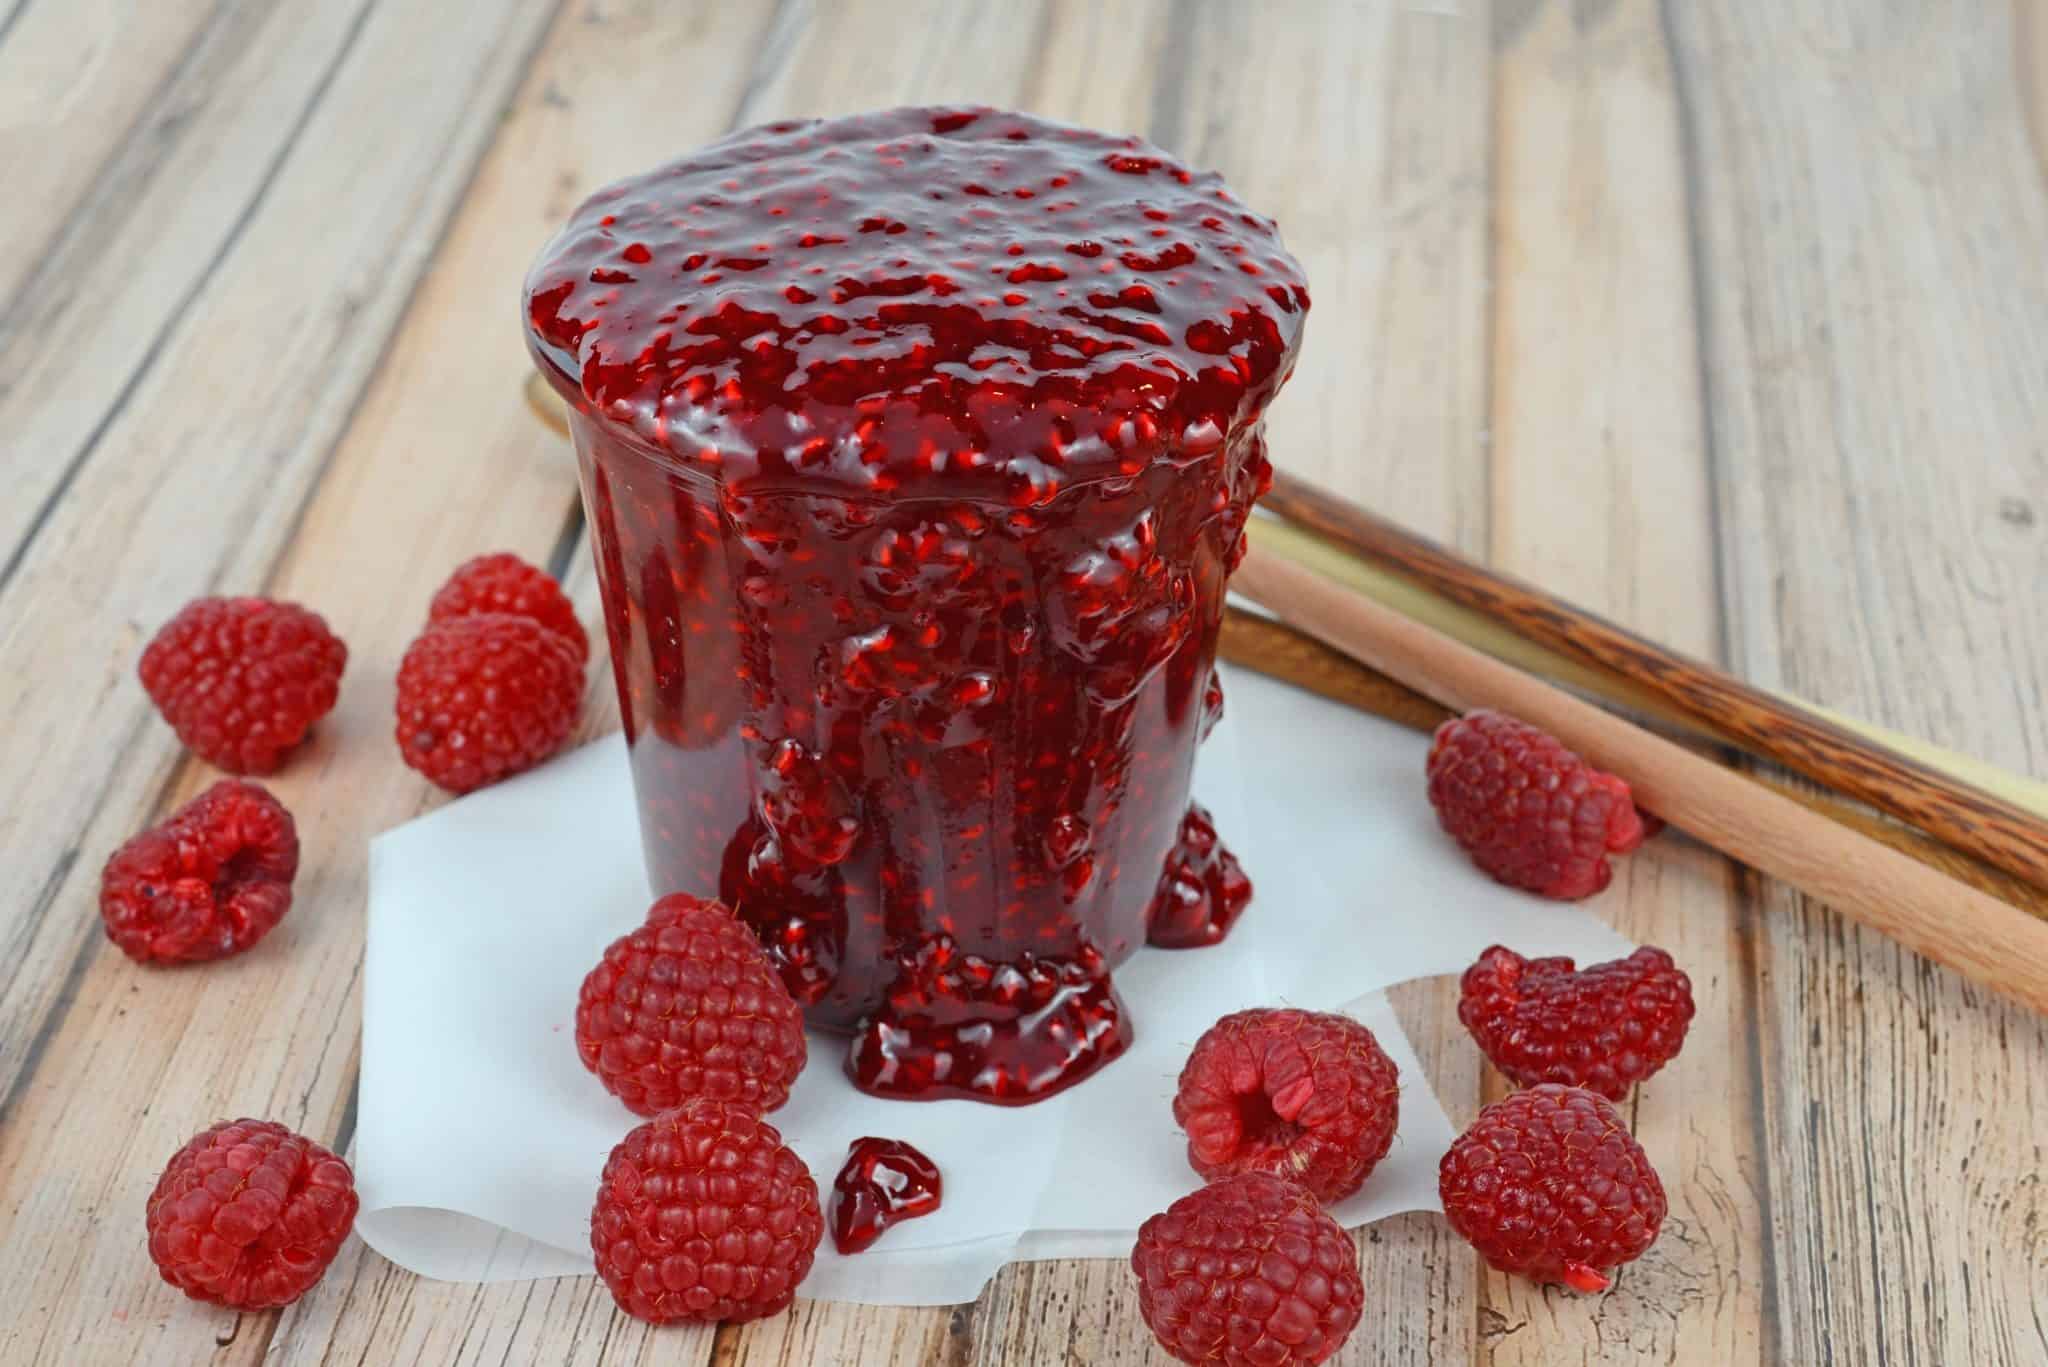 Easy Raspberry Sauce is so versatile, use it on ice cream cheesecake, meringues, chocolate cake and more! And it only takes 5 ingredients and 20 minutes!